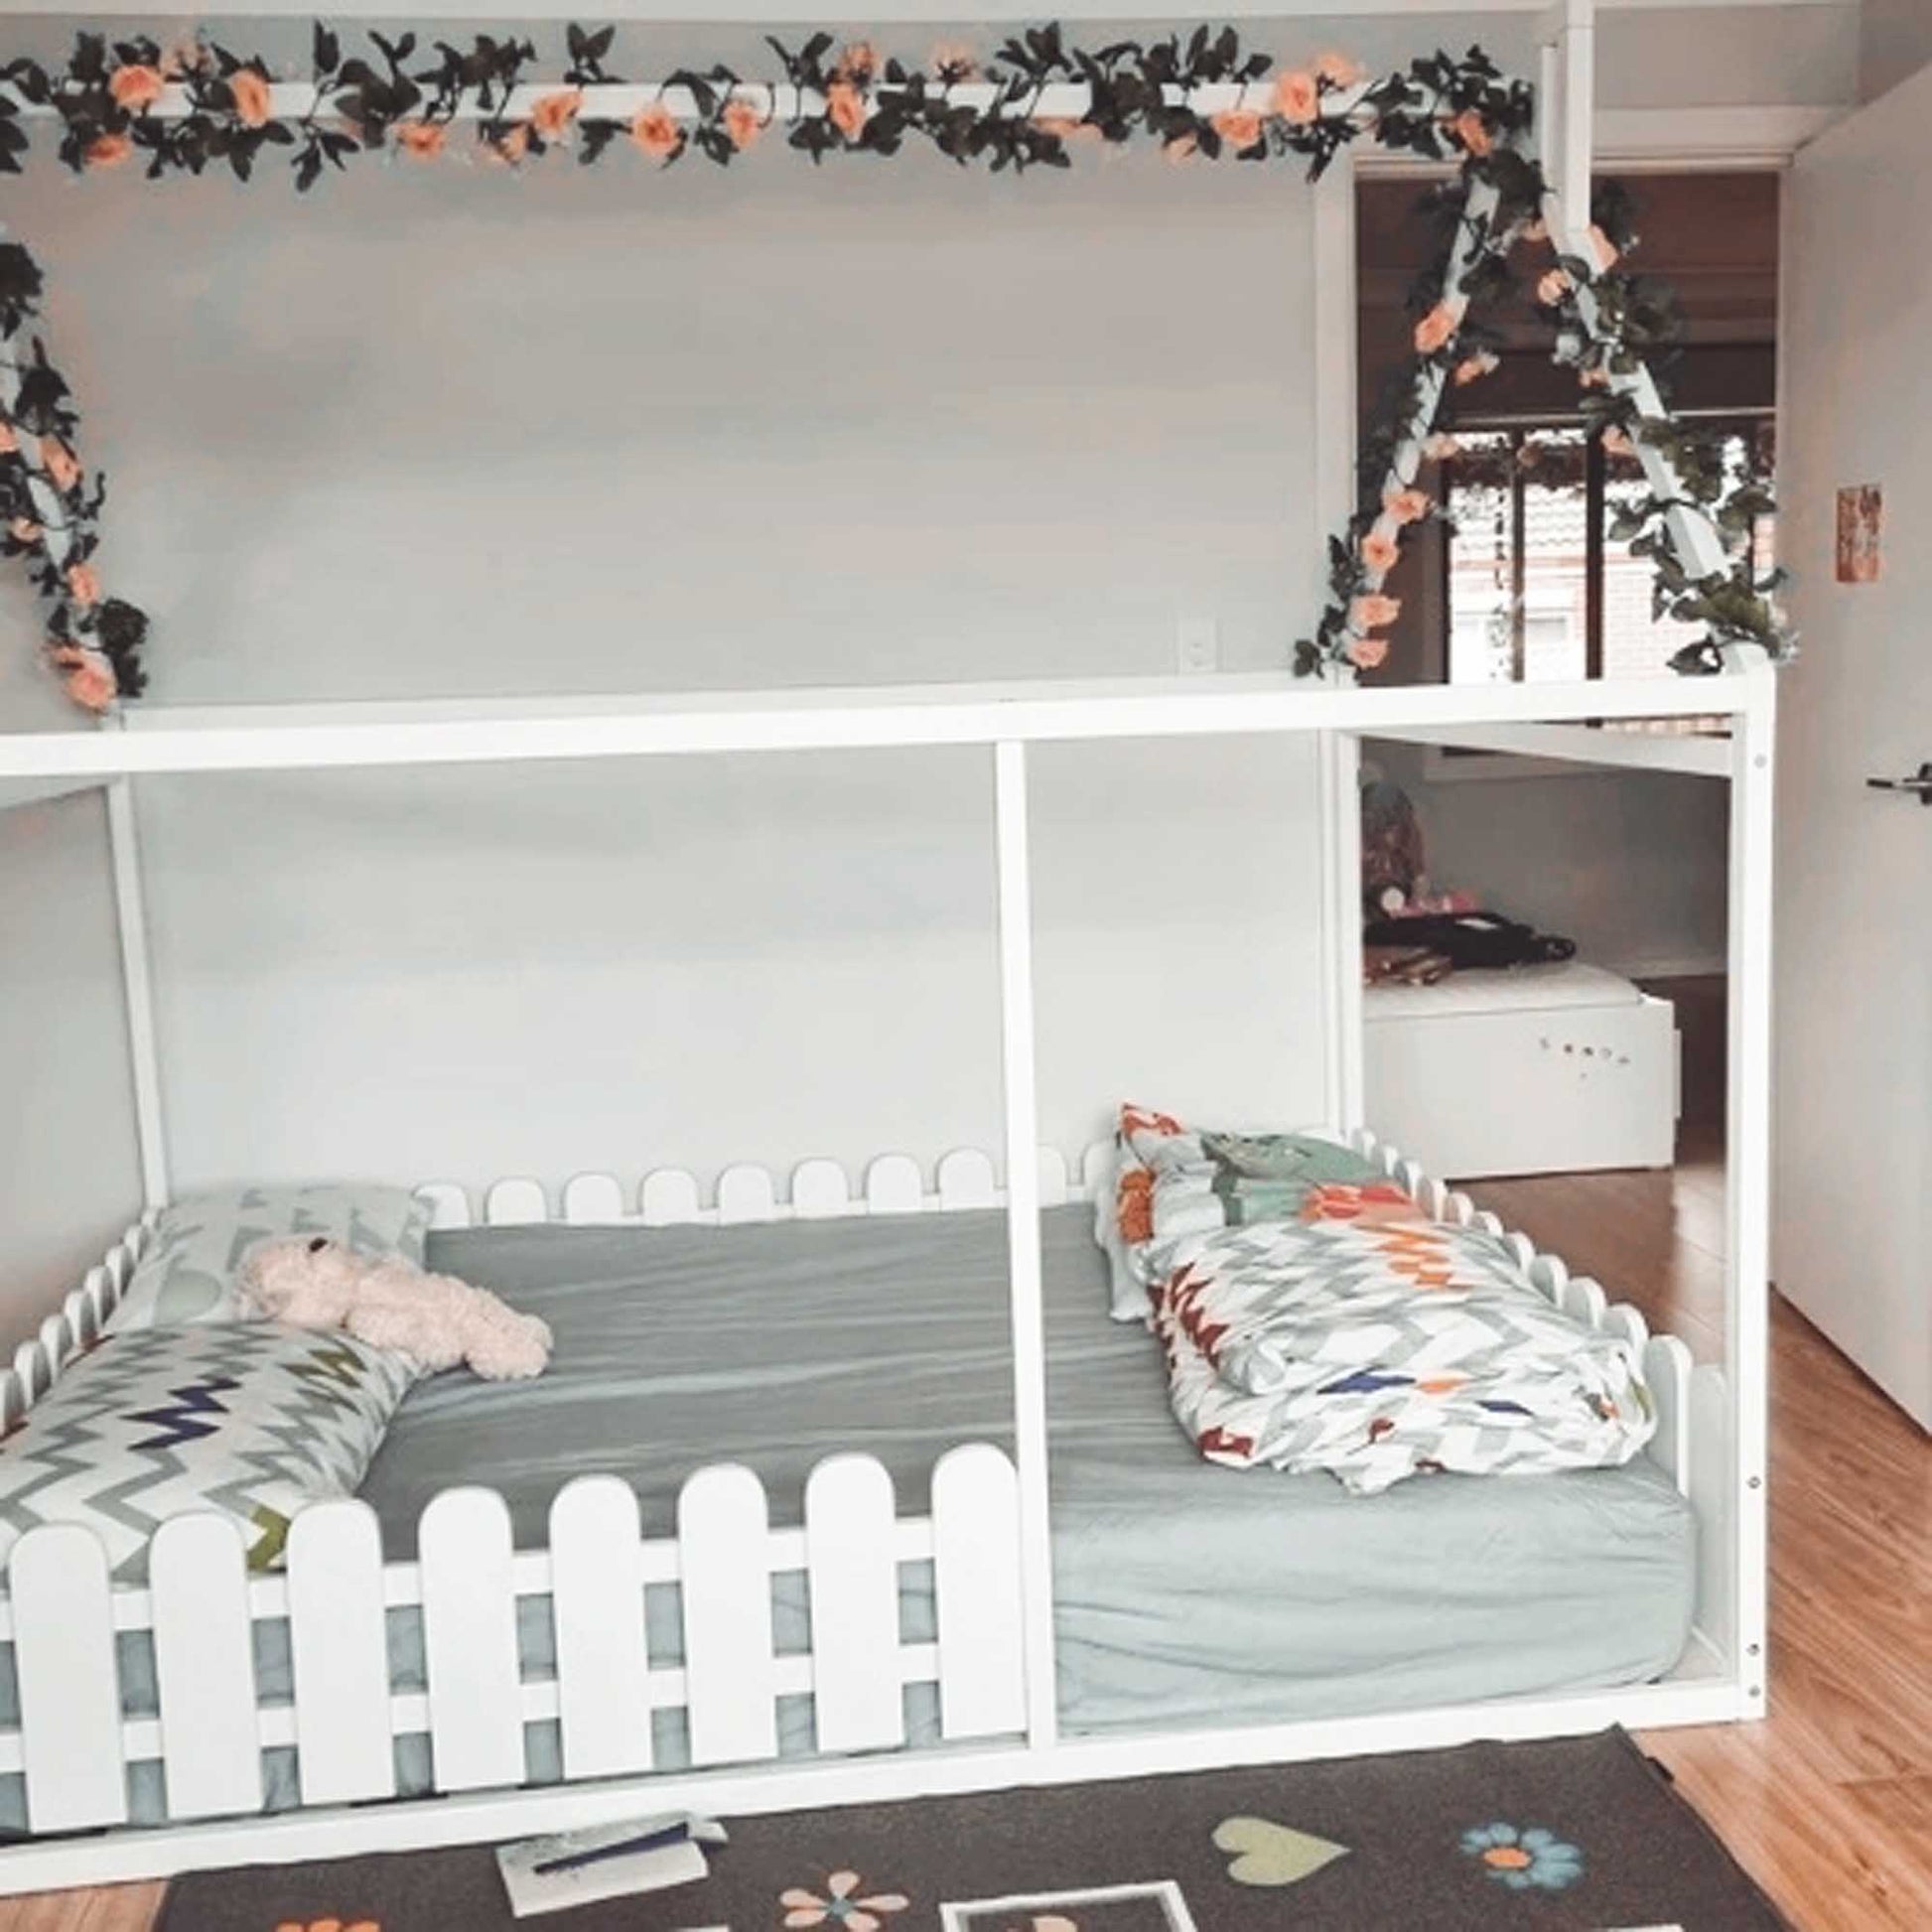 A child's bedroom with a platform house bed with a picket fence.